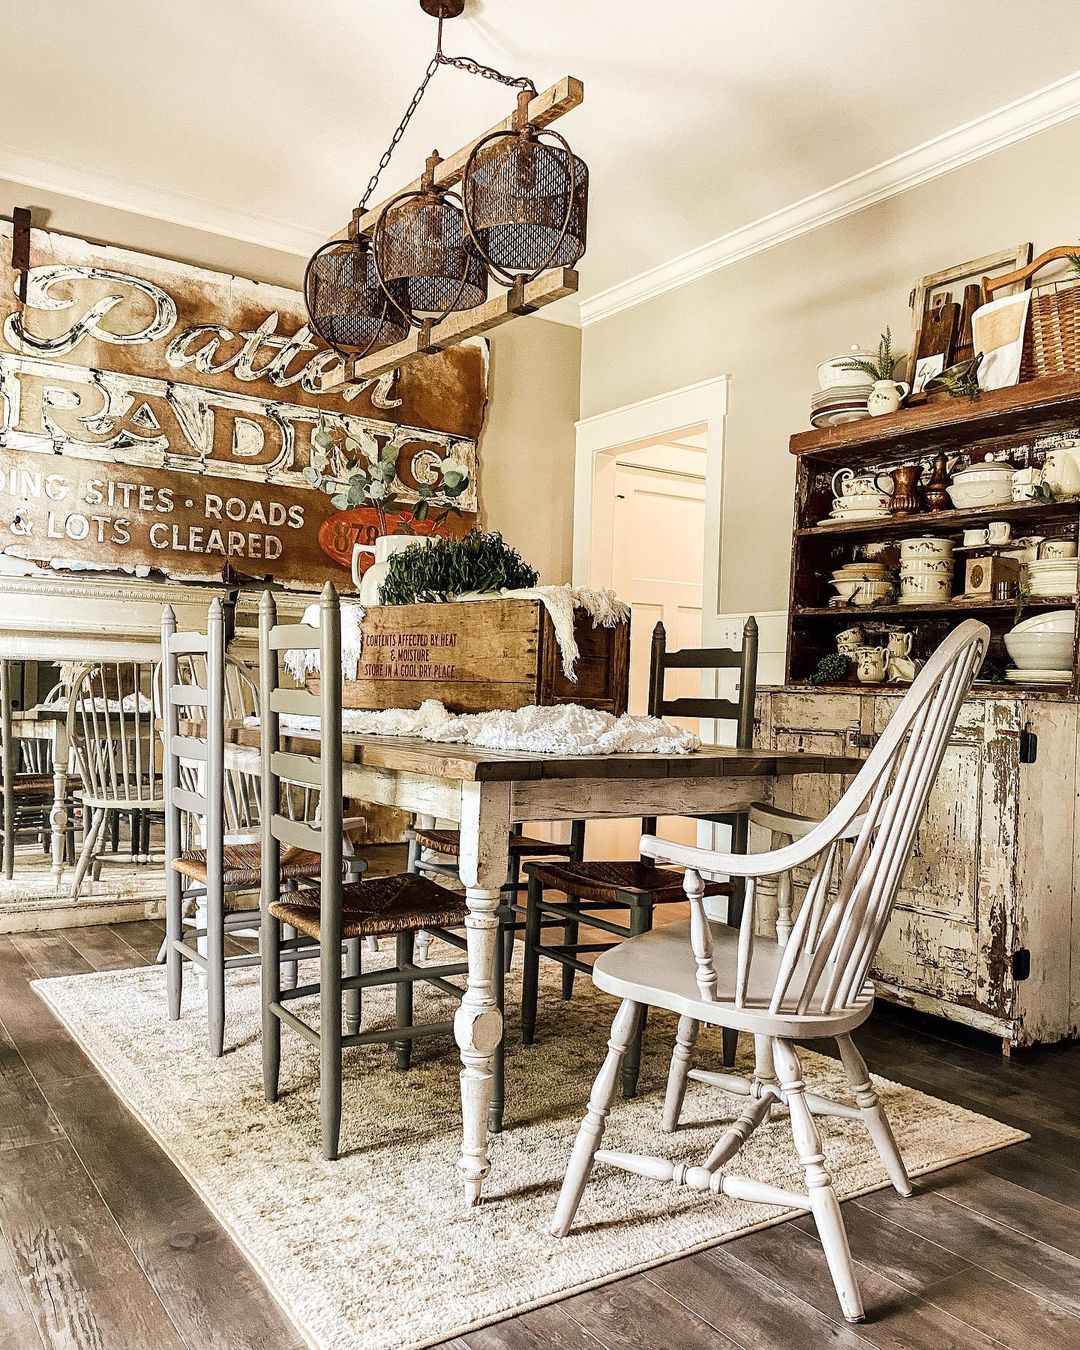 Rustic Charm with Vintage Accents